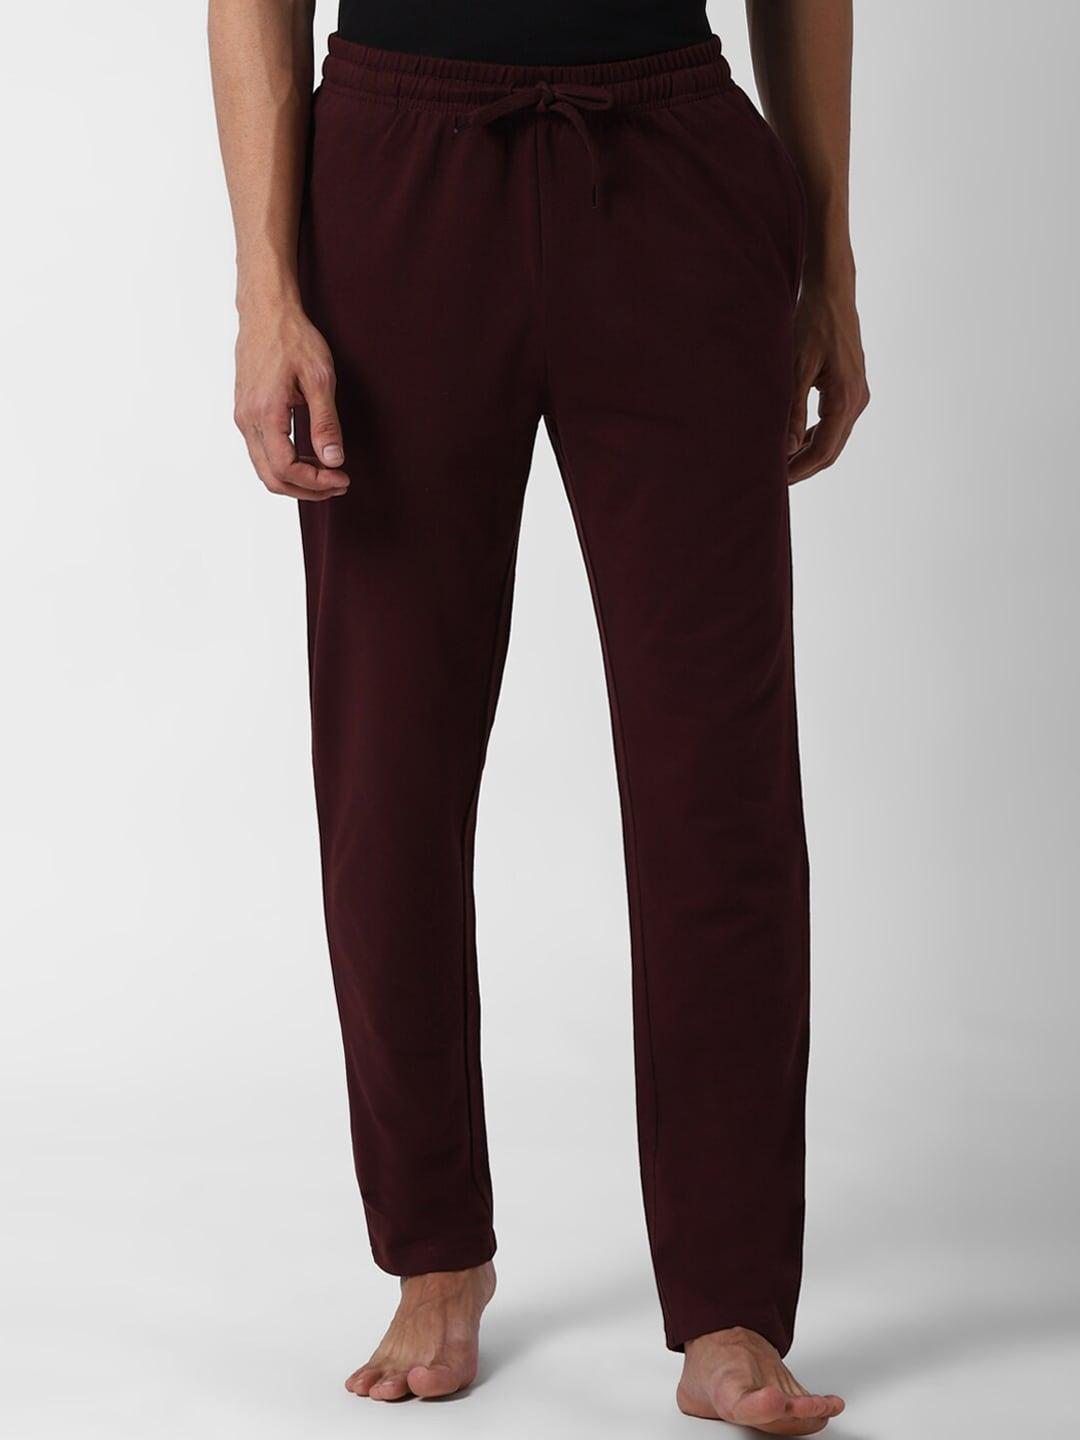 peter-england-men-maroon-solid-pure-cotton-lounge-pants